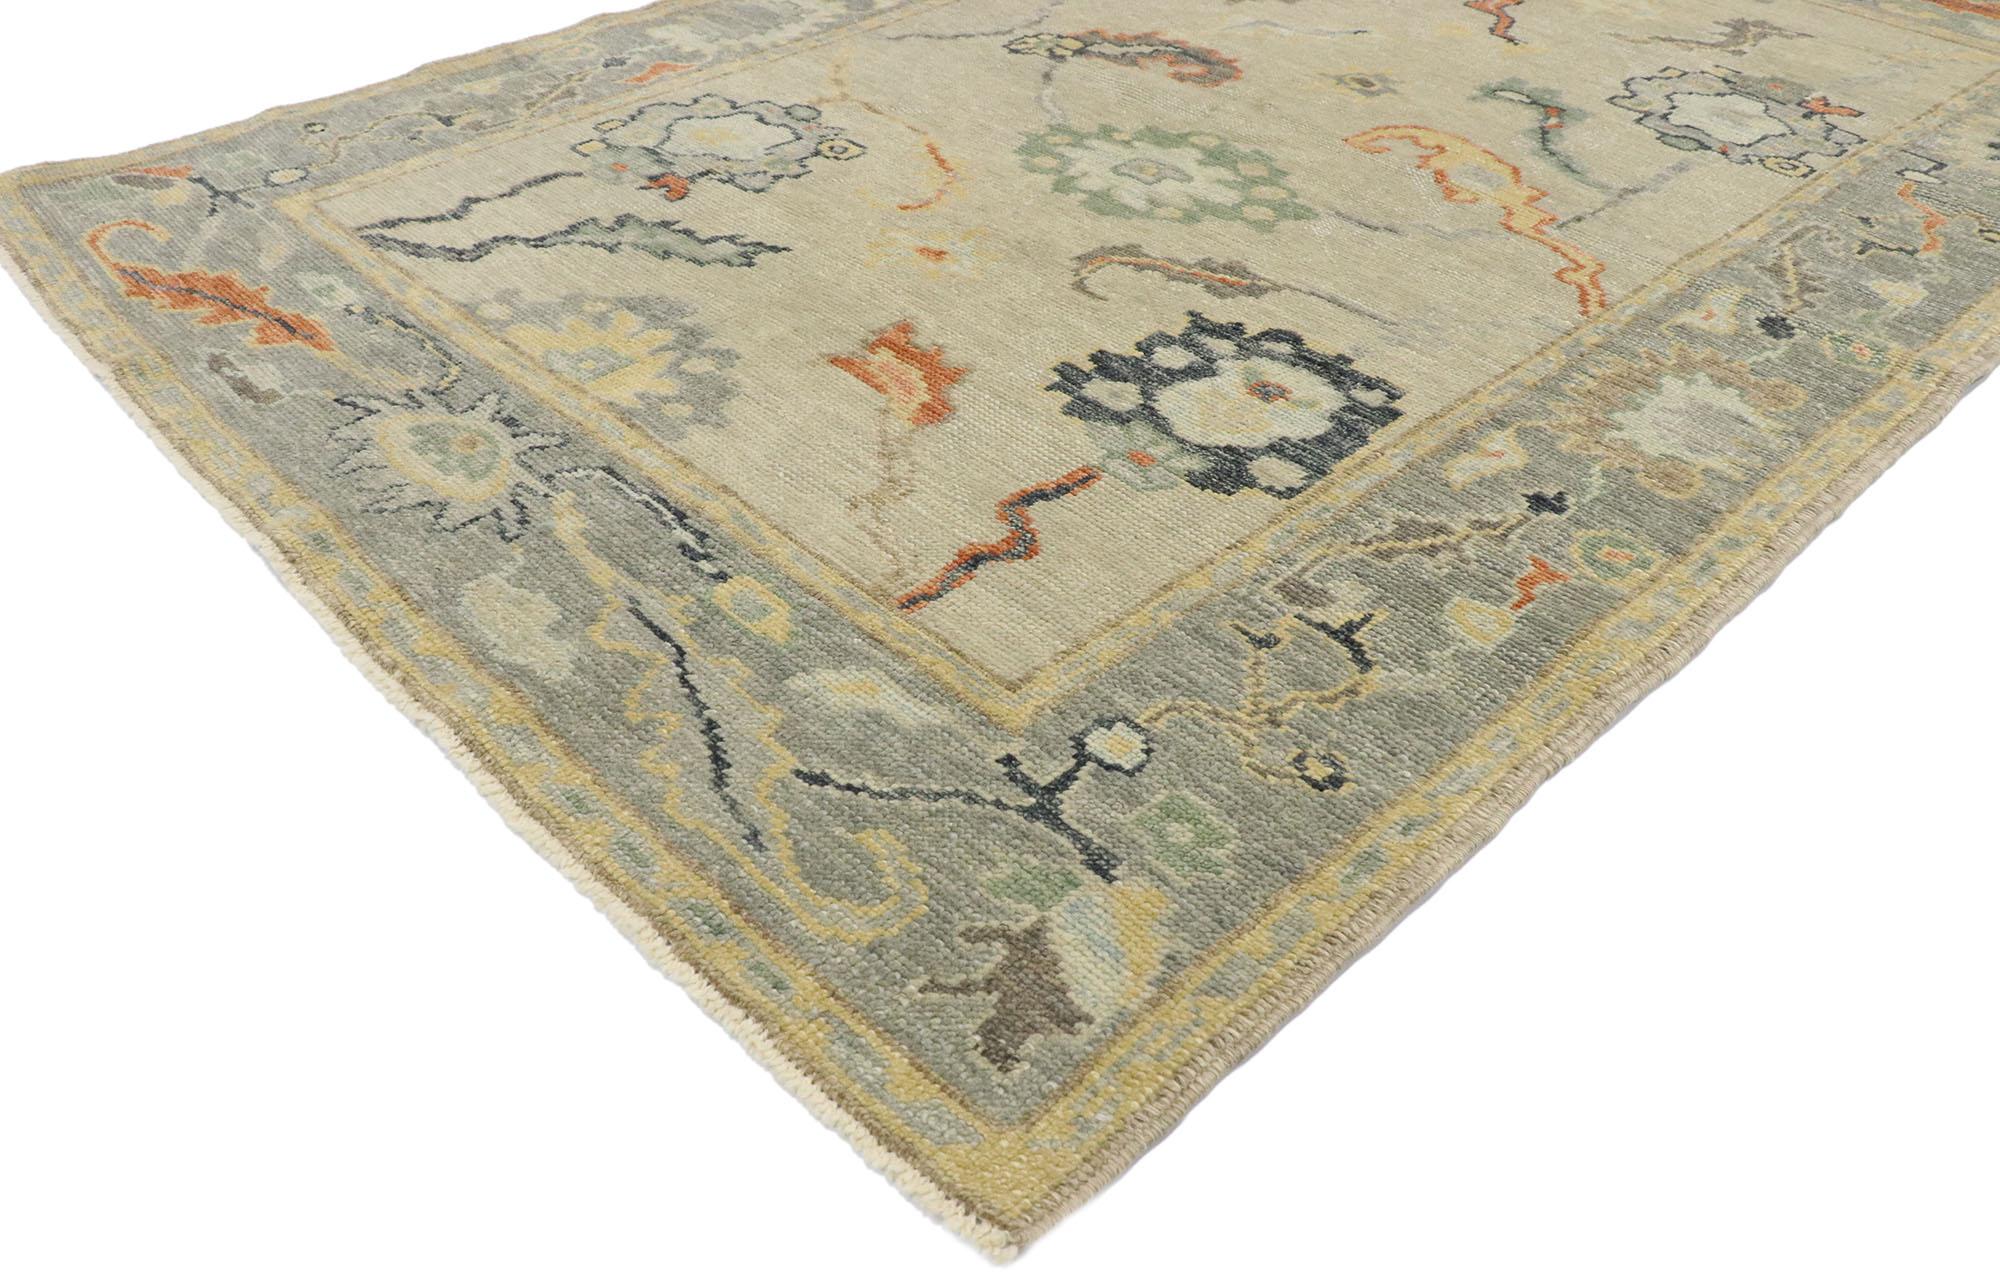 53430, new contemporary Turkish Oushak rug with Martha's vineyard modern Coastal style. Blending elements from the modern world with a coastal color palette, this hand knotted wool contemporary Turkish Oushak rug beautifully embodies Martha's